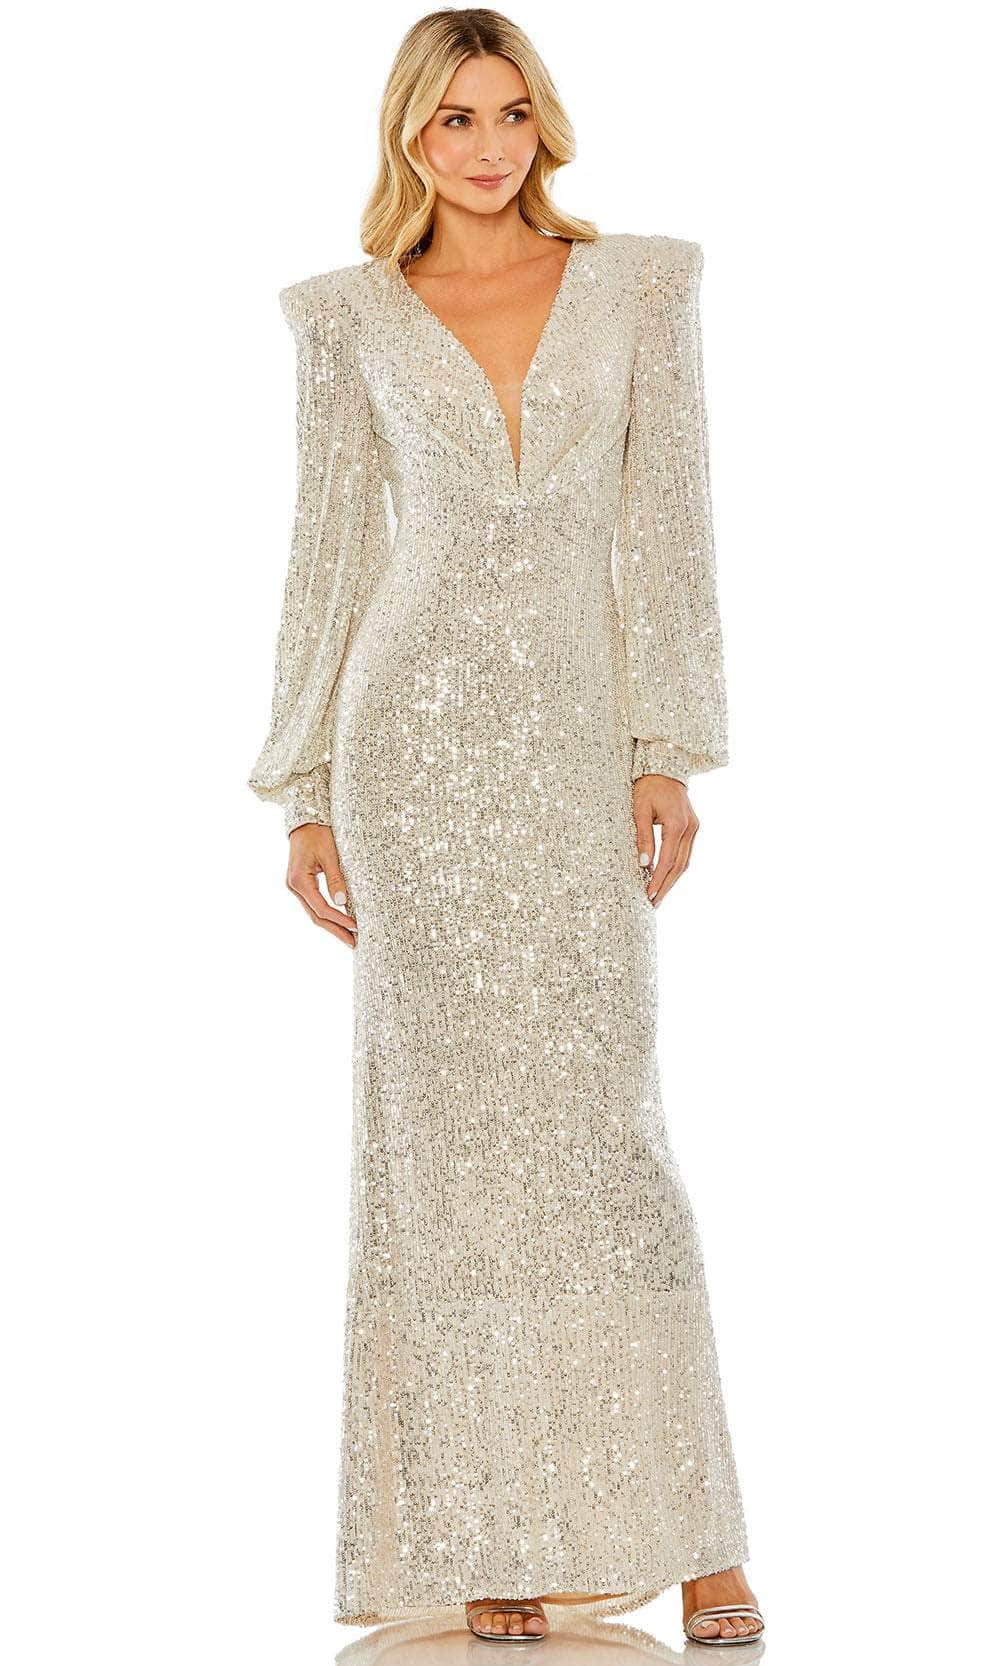 Ieena Duggal 26722 - Puff Sleeves Sheath Evening Dress Special Occasion Dresses 4 / Nude Silver